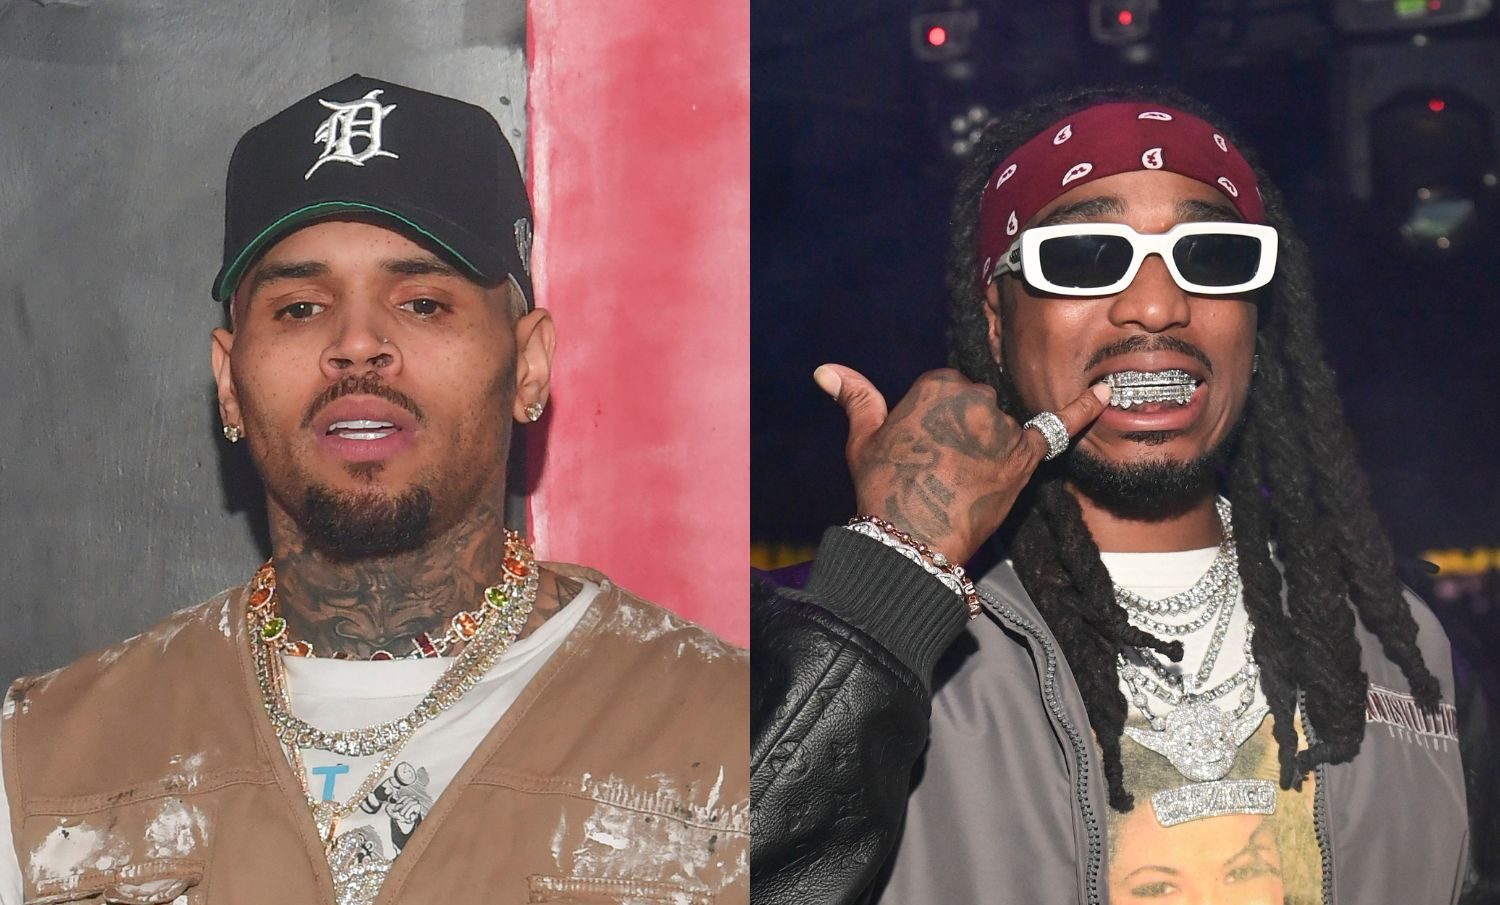 Chile! Chris Brown Goes IN On Quavo In Unusual Diss Tune ‘Weakest Hyperlink’ (LISTEN)